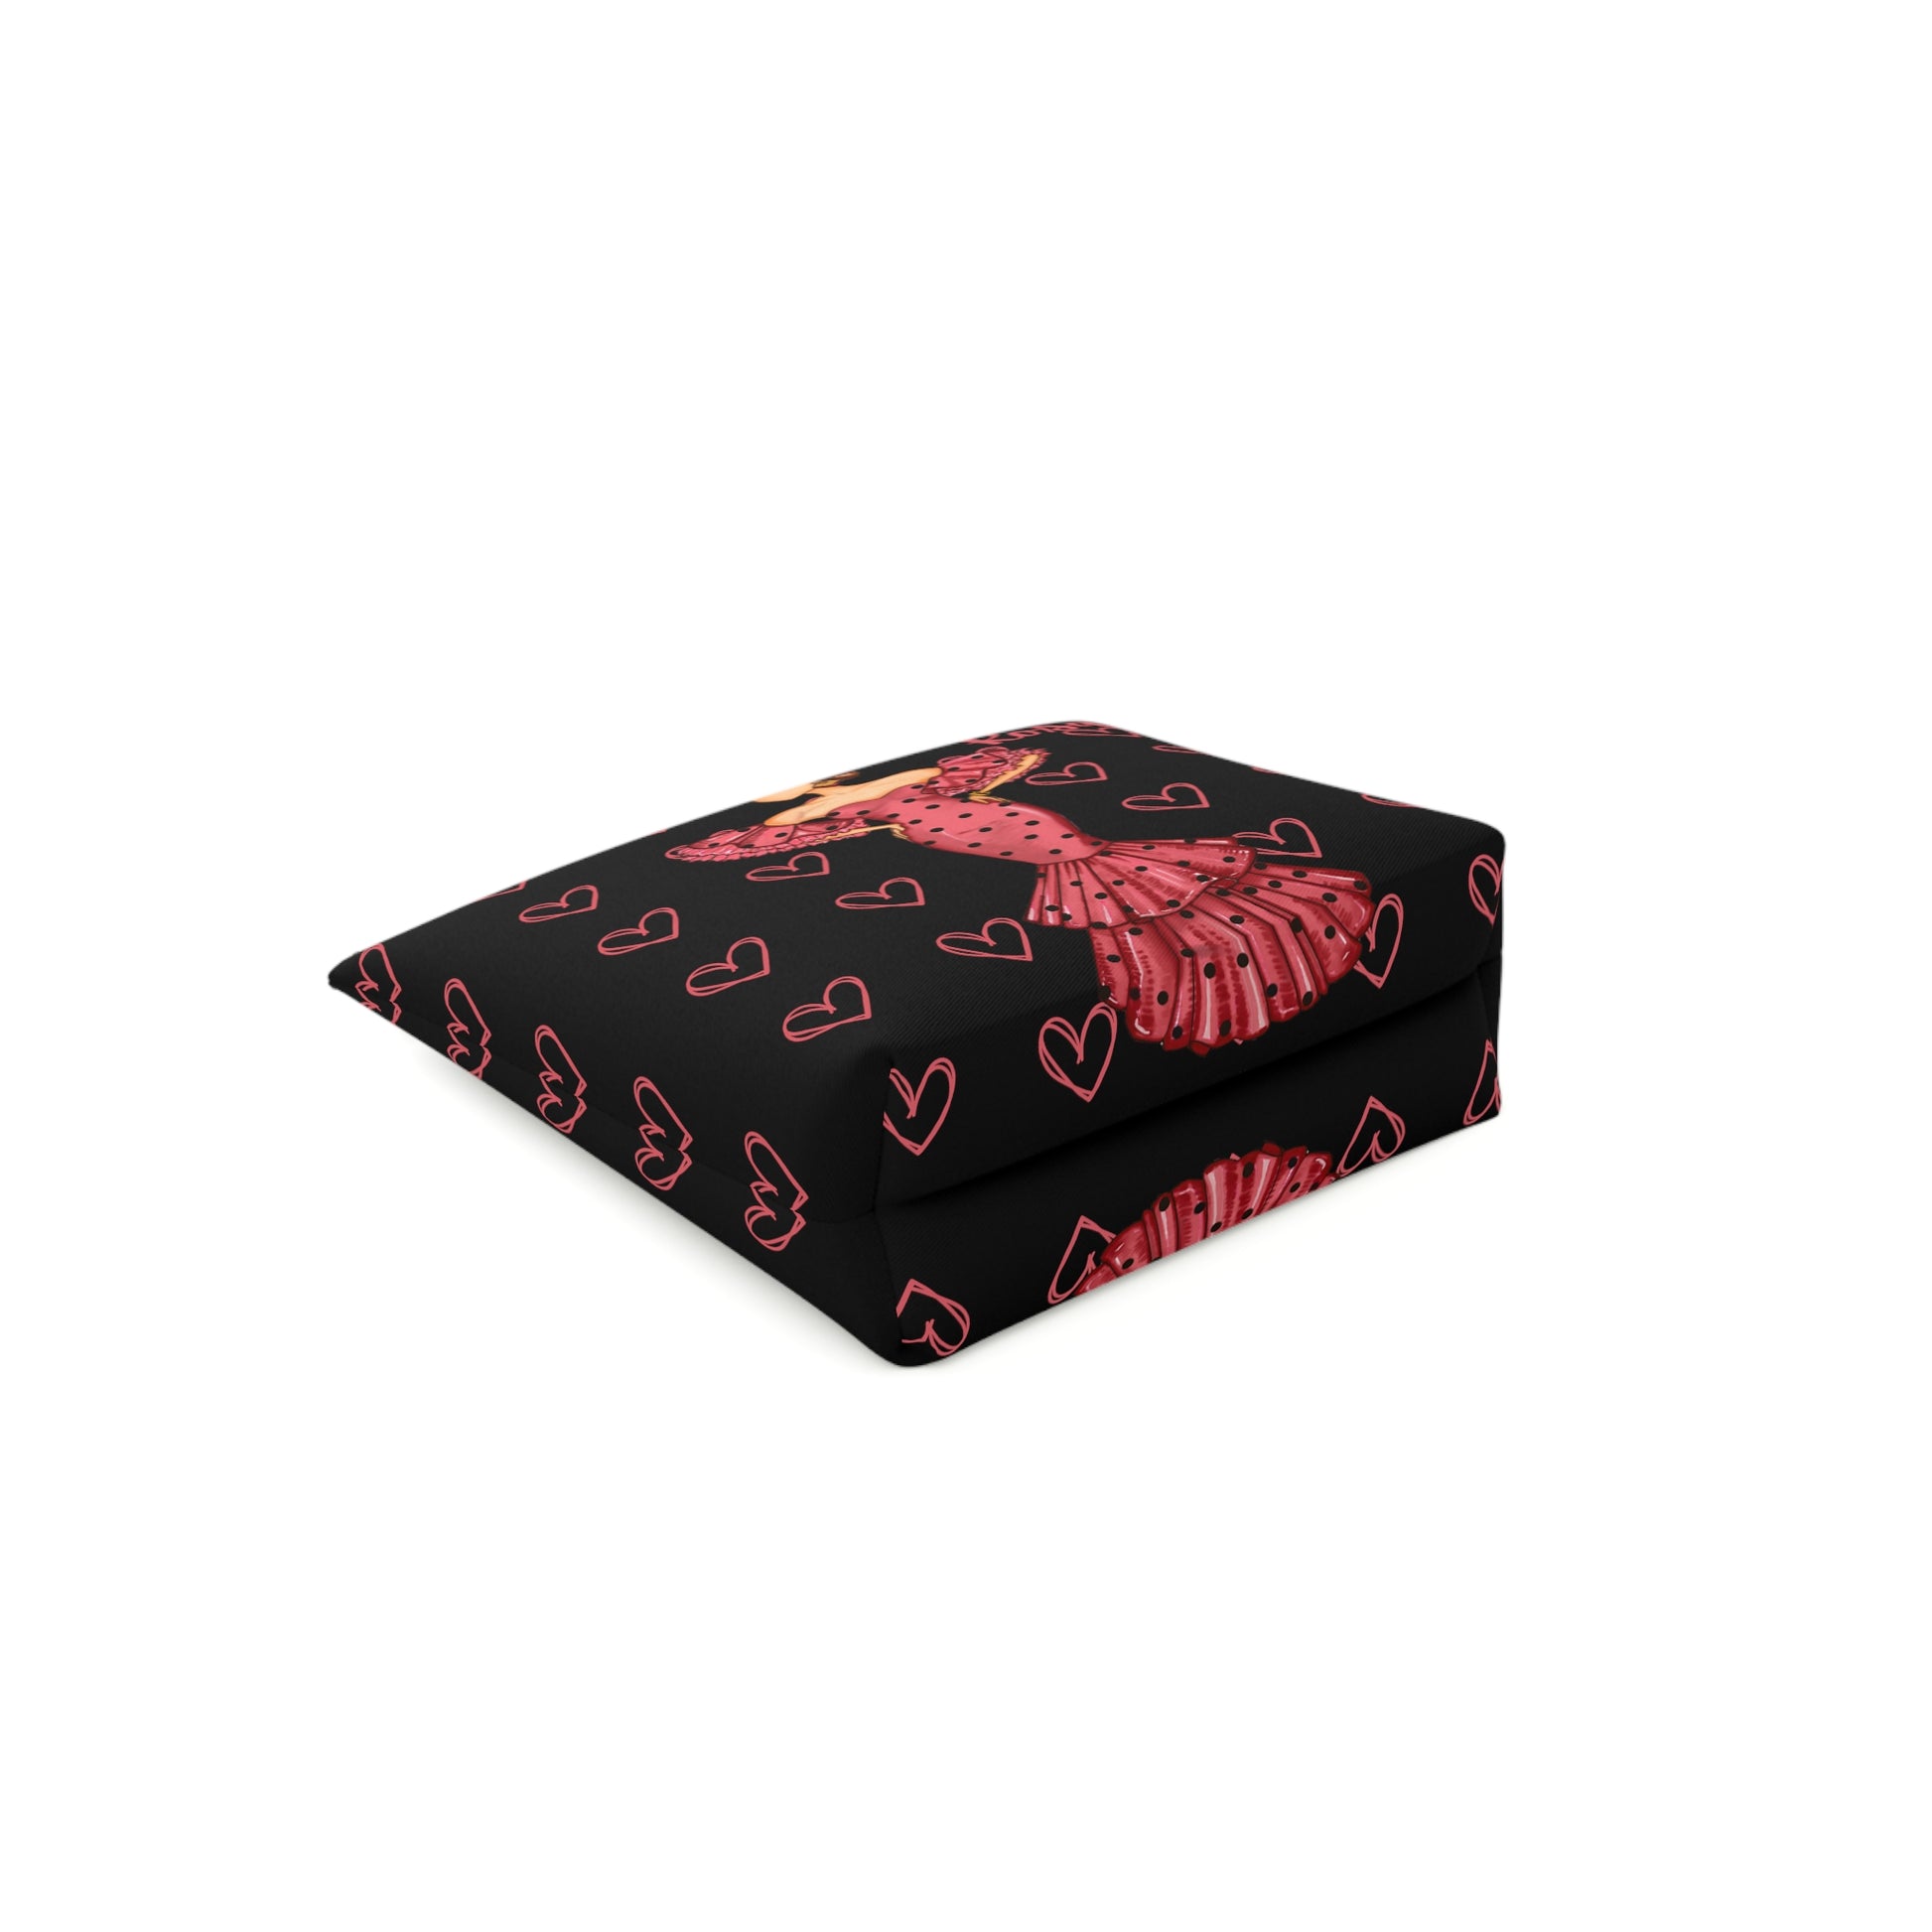 a black and red blanket with hearts on it